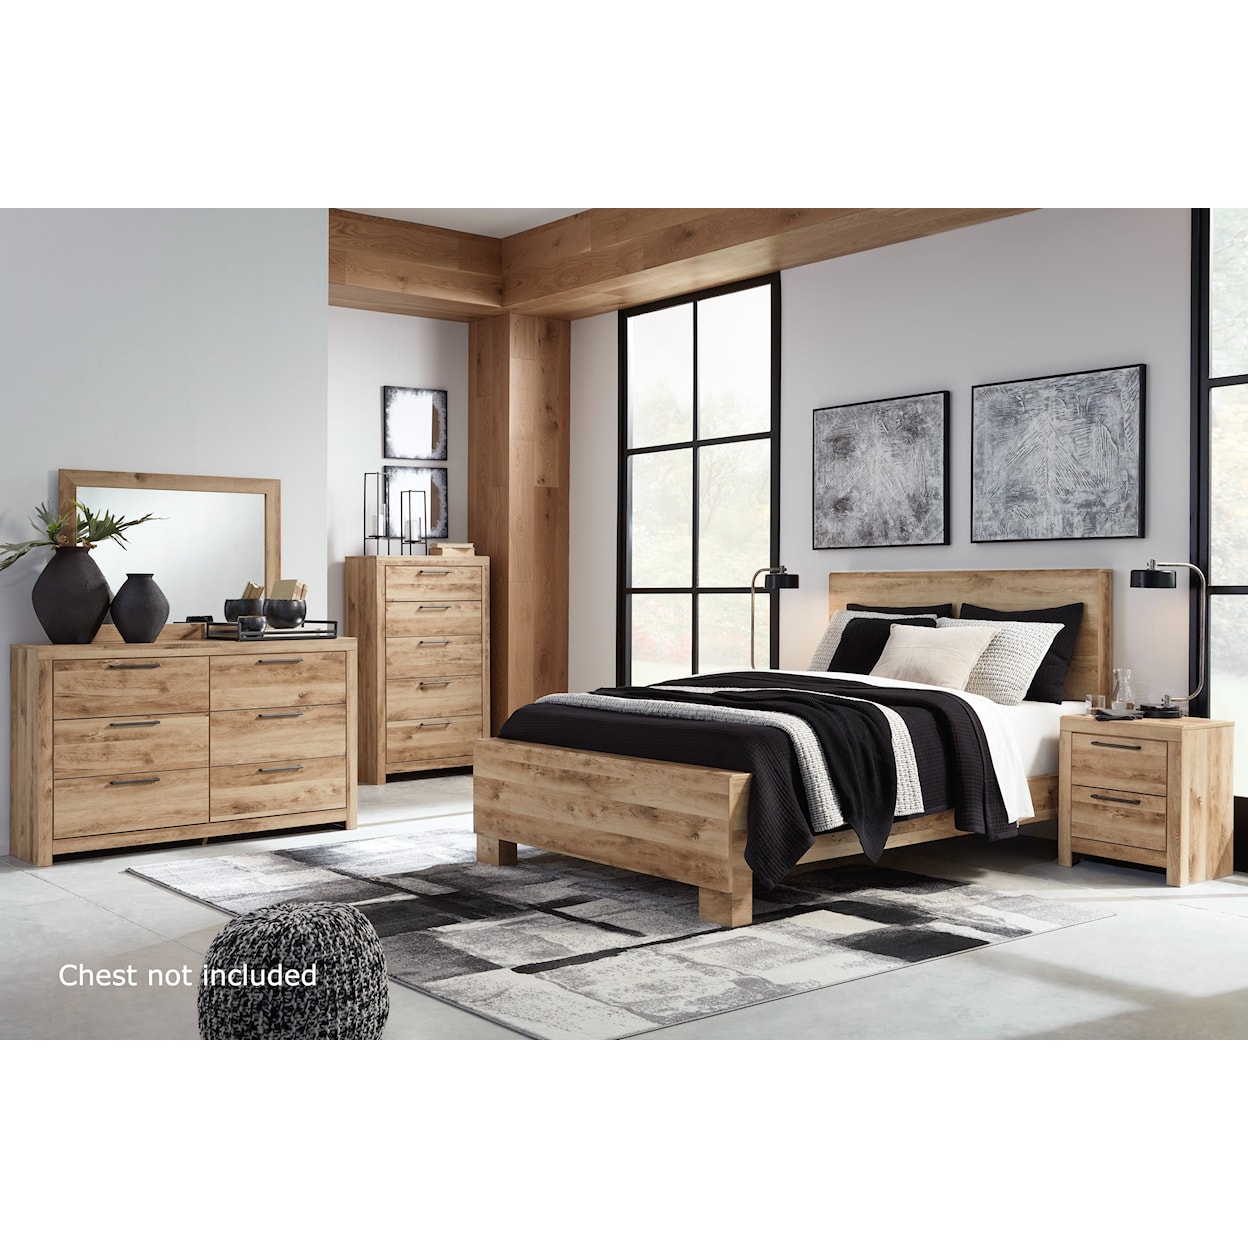 Signature Design by Ashley Furniture Hyanna Queen Bedroom Set